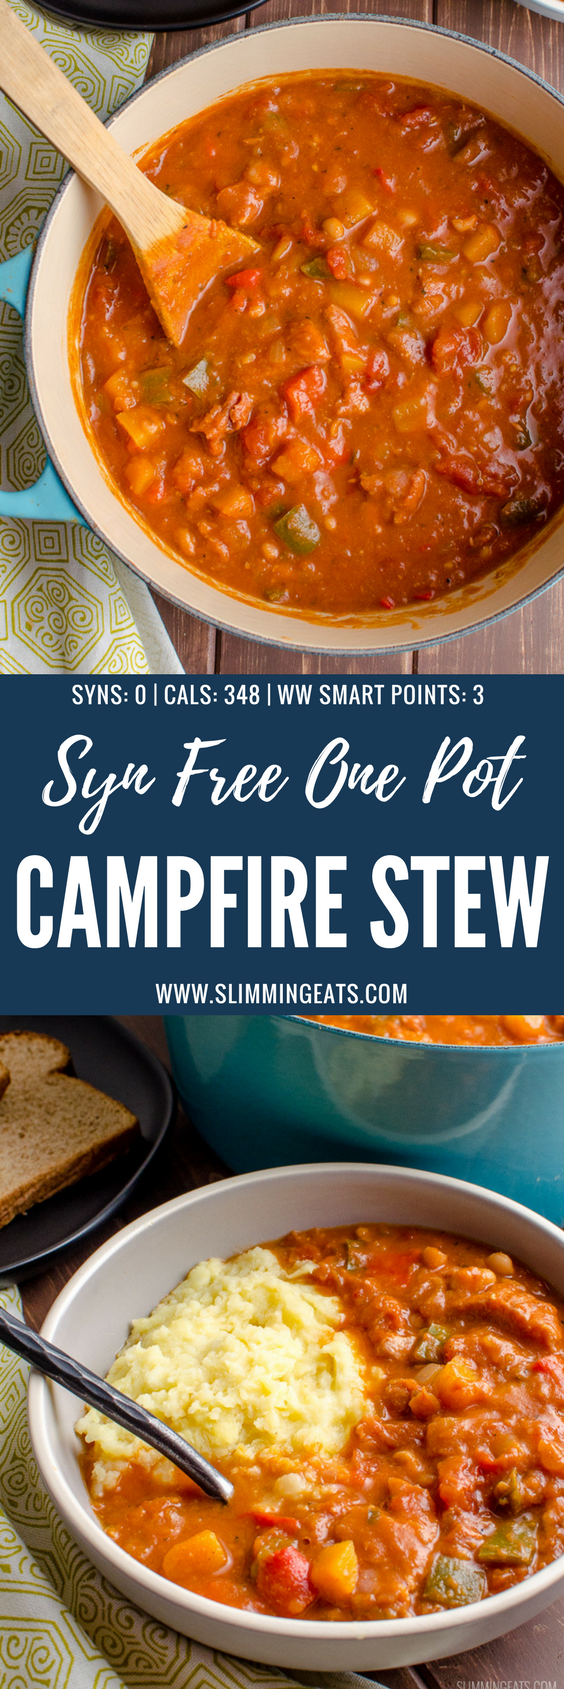 Dig into a spicy hearty warming bowl of Syn Free One Pot Campfire Stew with delicious Southern Flavours - my take on a popular Slimming World Recipe. Gluten Free, Dairy Free, Slimming World and Weight Watchers friendly | www.slimmingeats.com